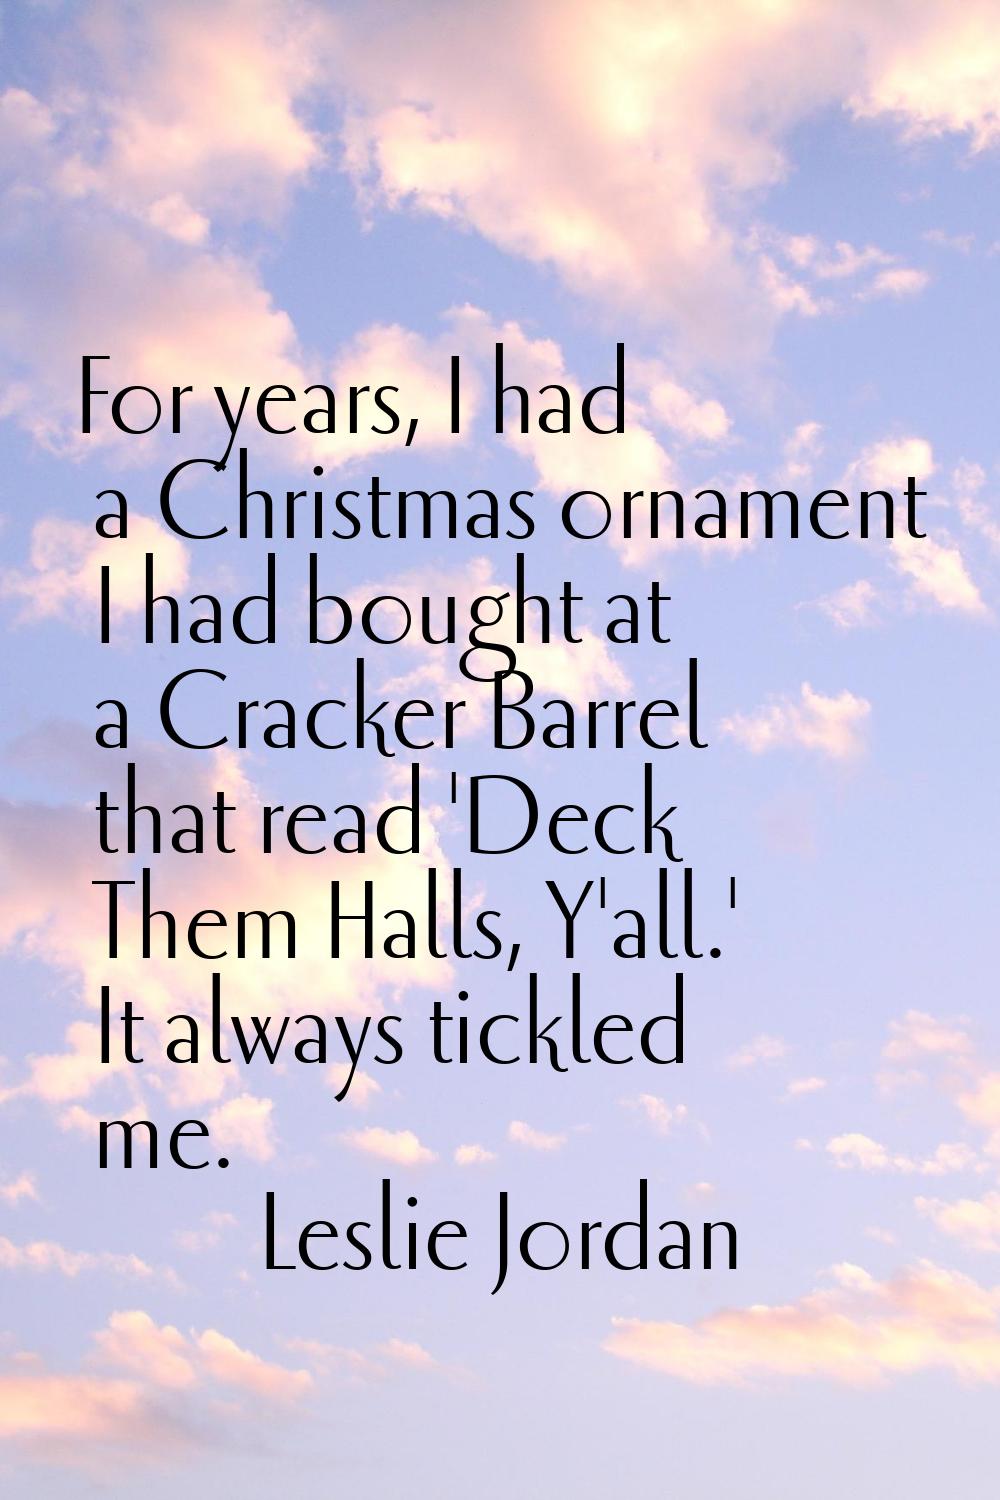 For years, I had a Christmas ornament I had bought at a Cracker Barrel that read 'Deck Them Halls, 